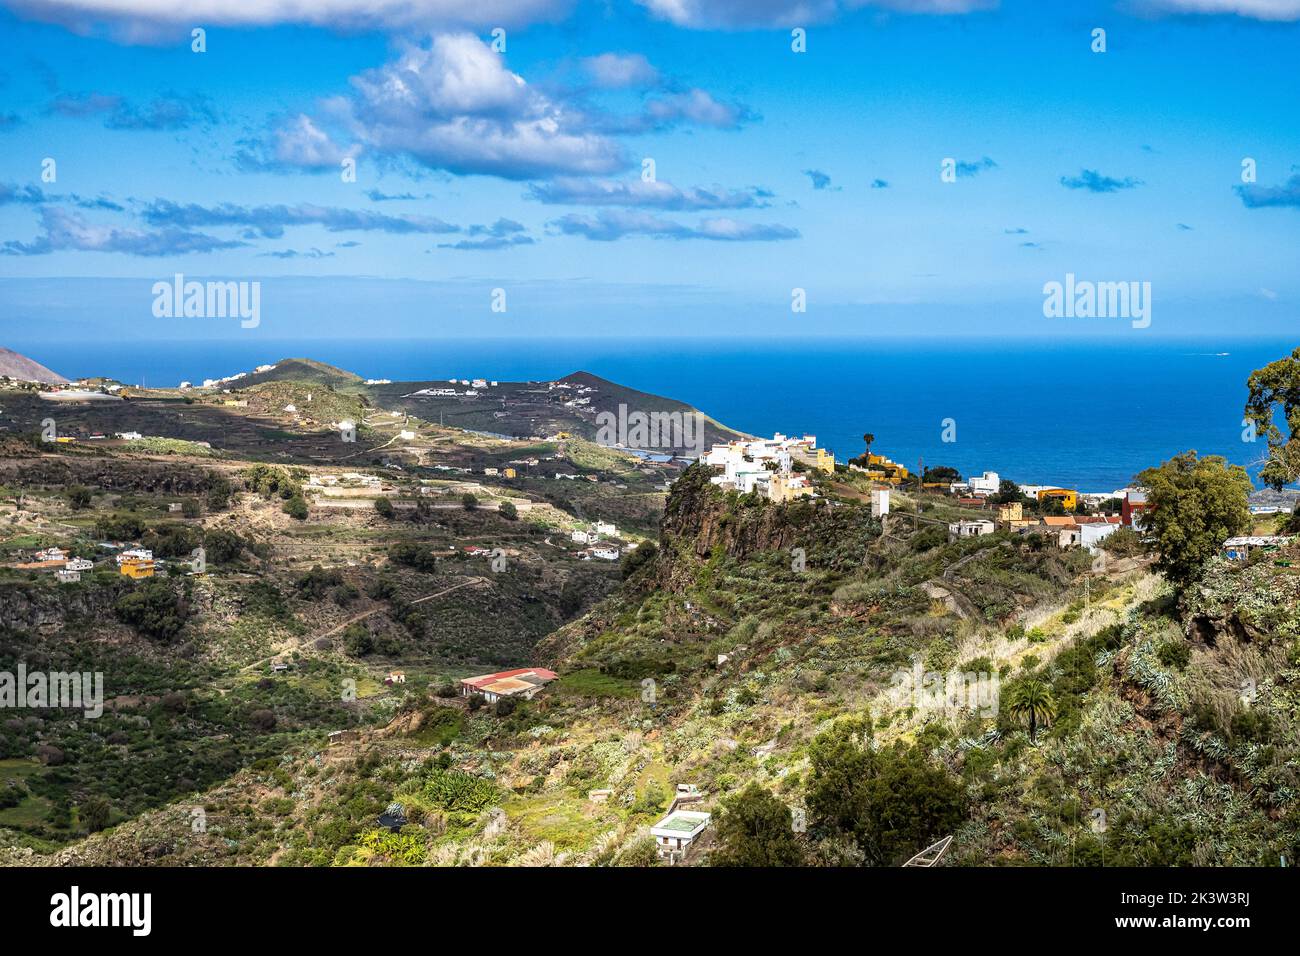 View of the Moya ravine at Moya, Gran Canaria, Canary Islands, Spain in Europa Stock Photo